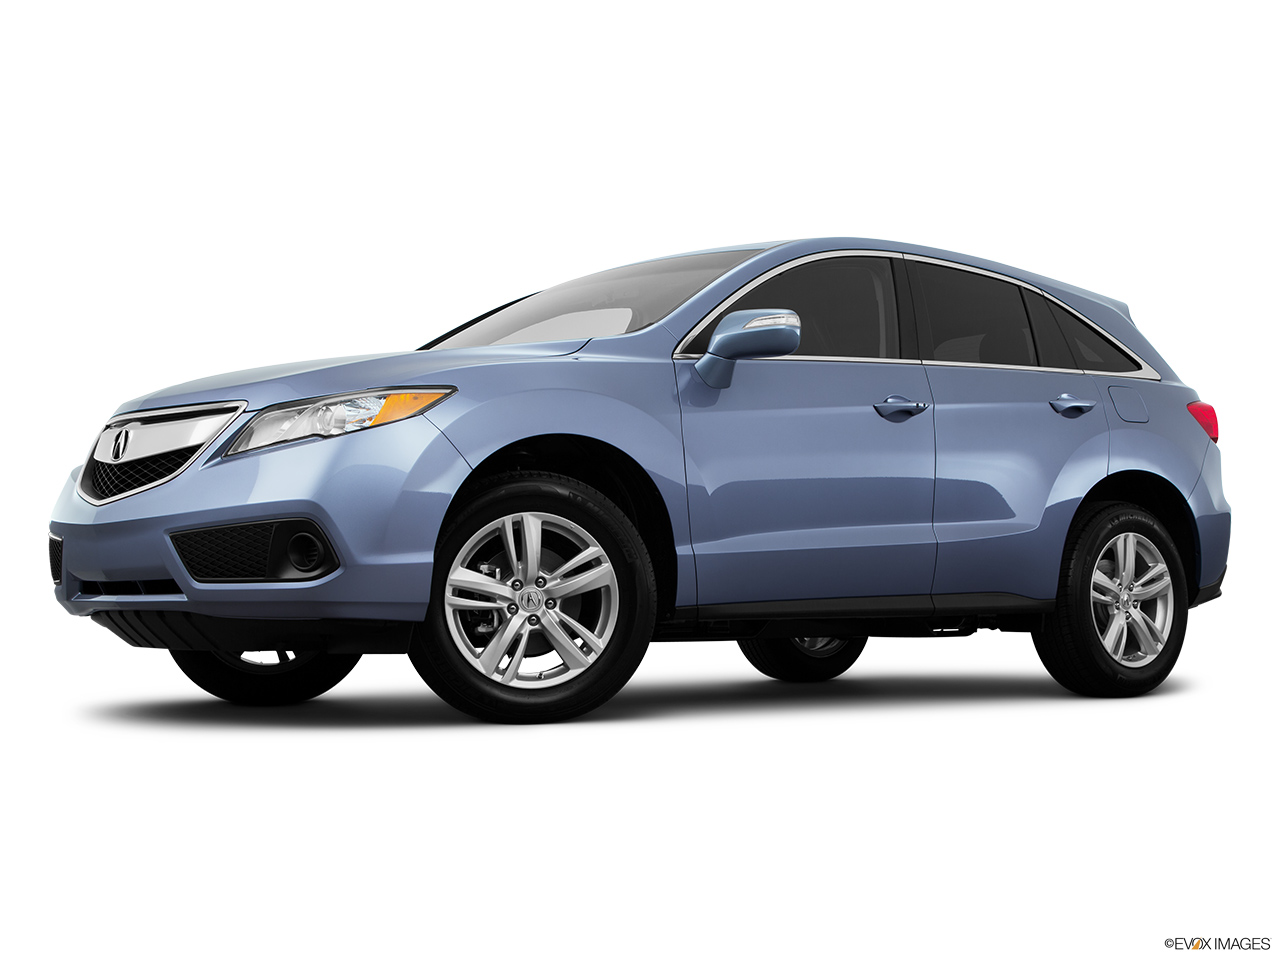 2015 Acura RDX AWD Low/wide front 5/8. 